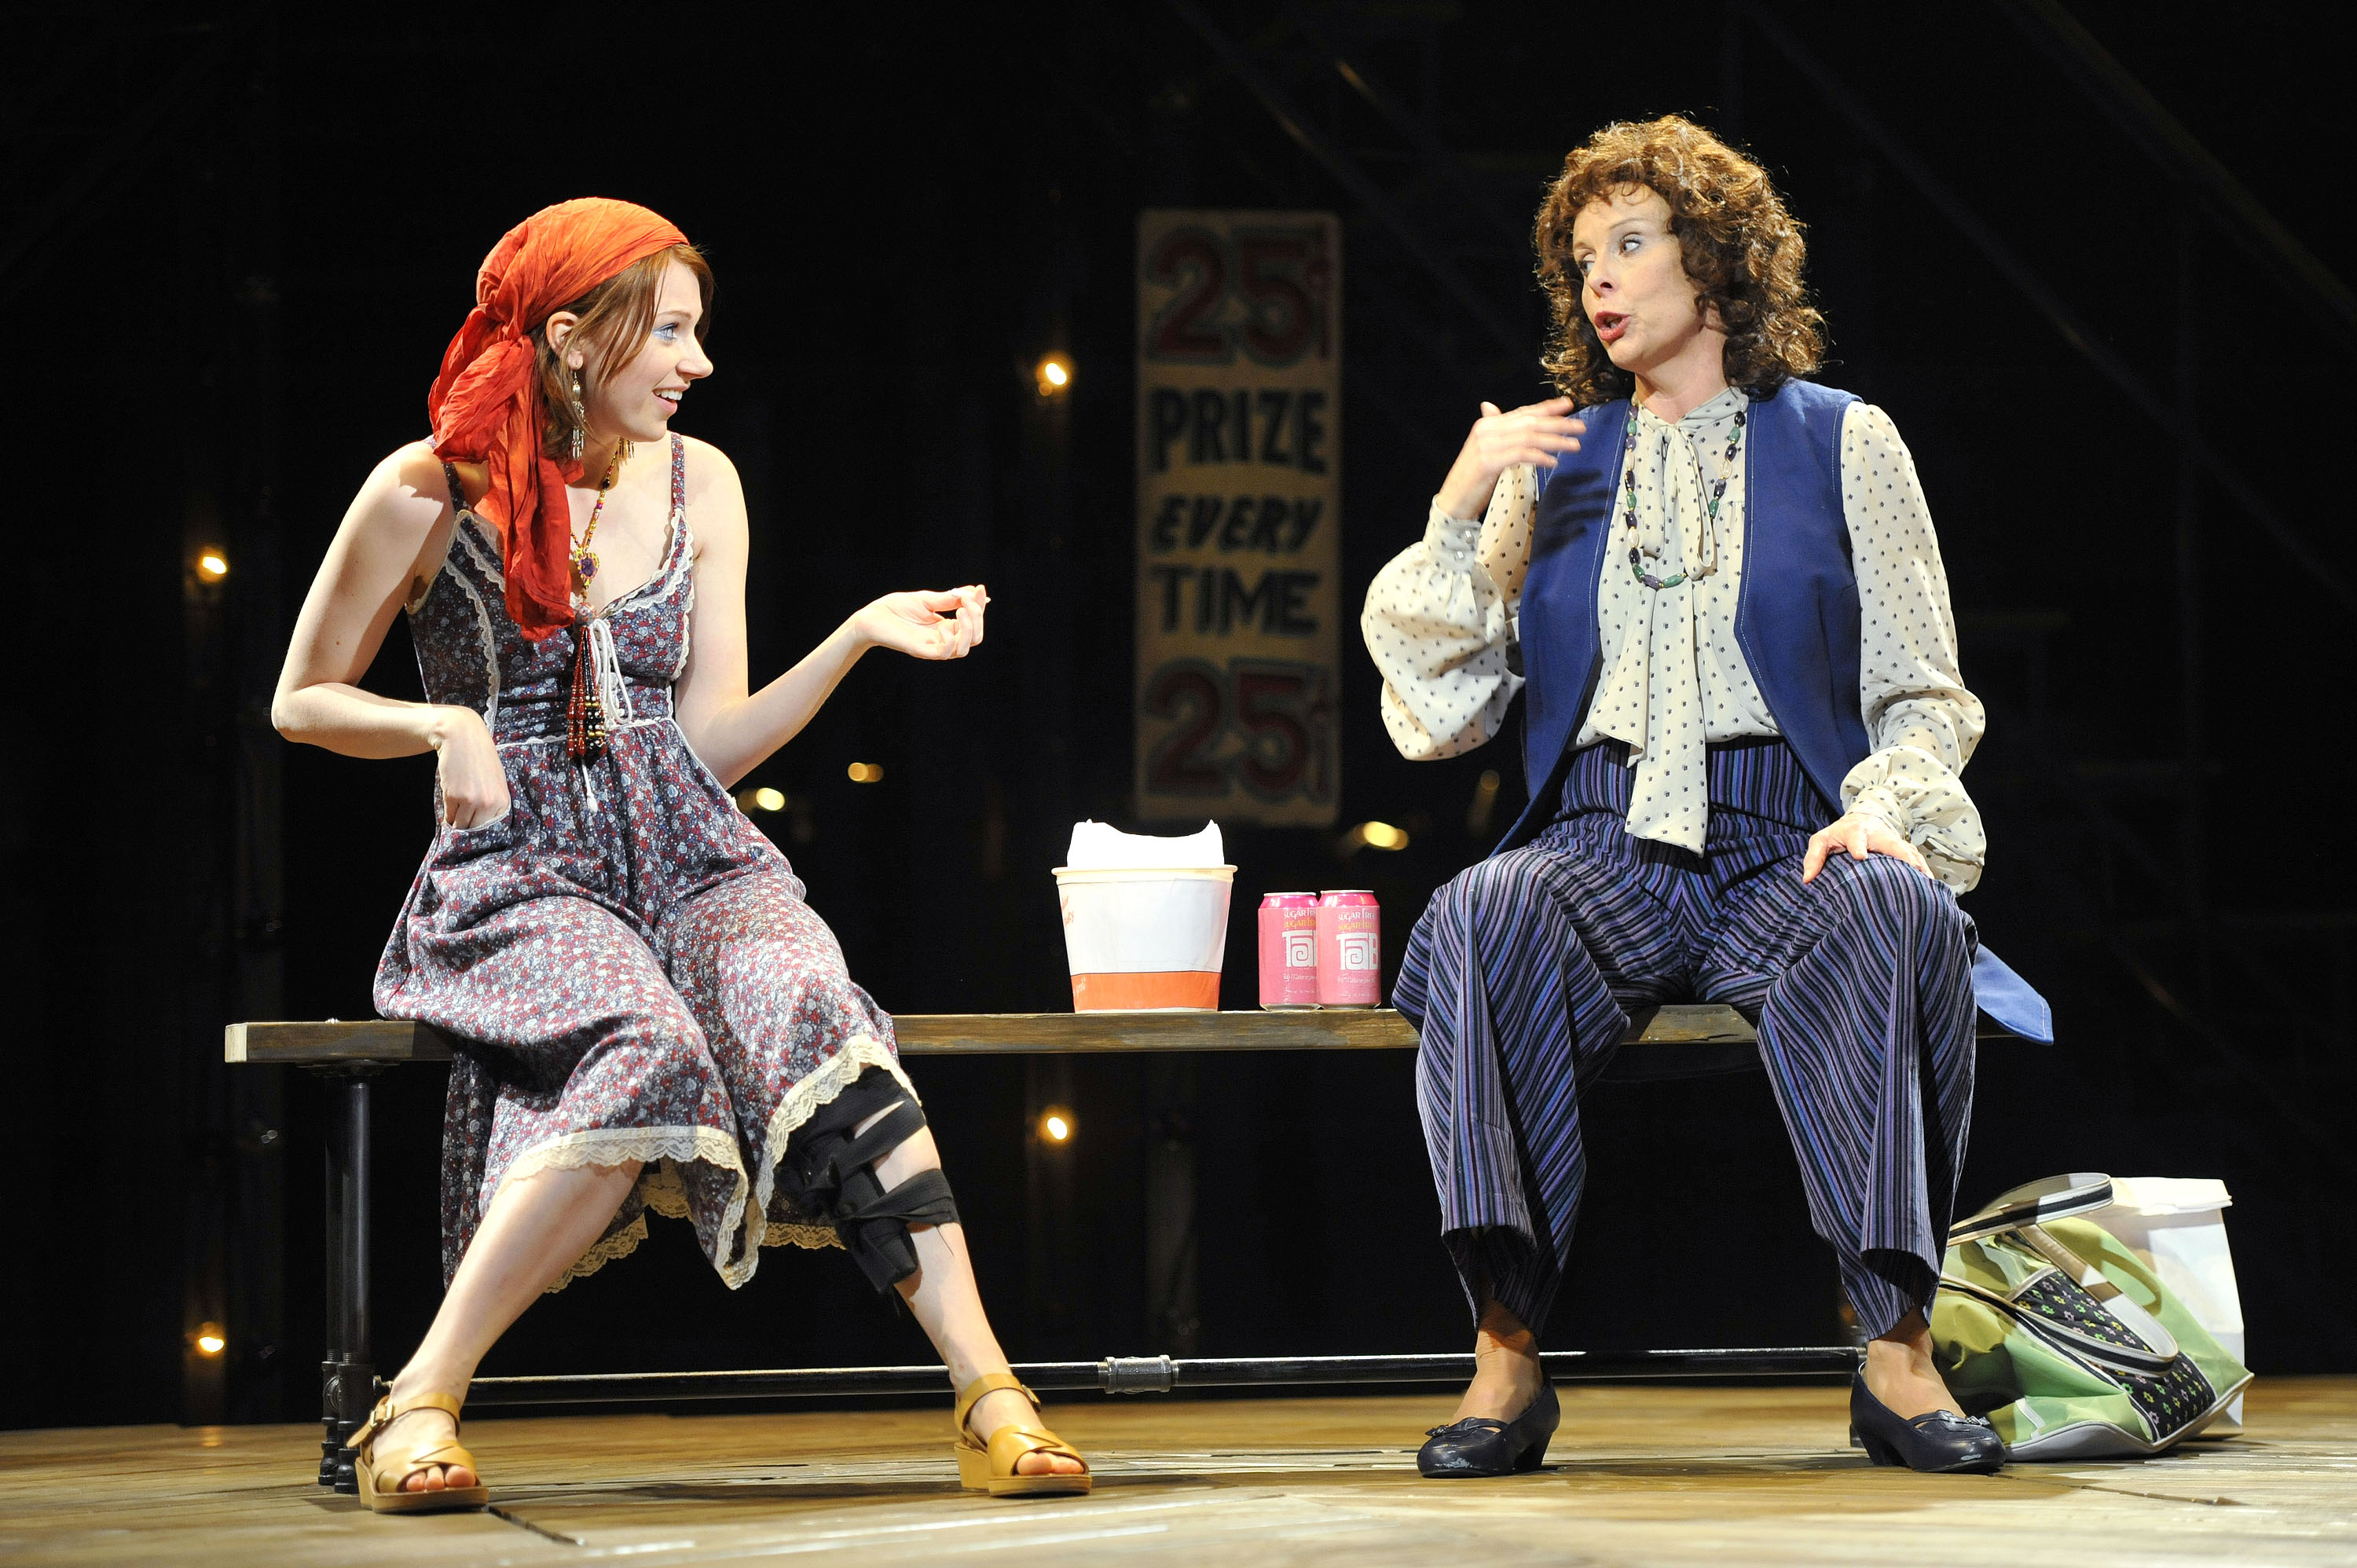 Left to right: MAREN SEARLE as Lynette “Squeaky” Fromme and JULIE FISHELL as Sara Jane Moore (photo by Jon Gardiner)